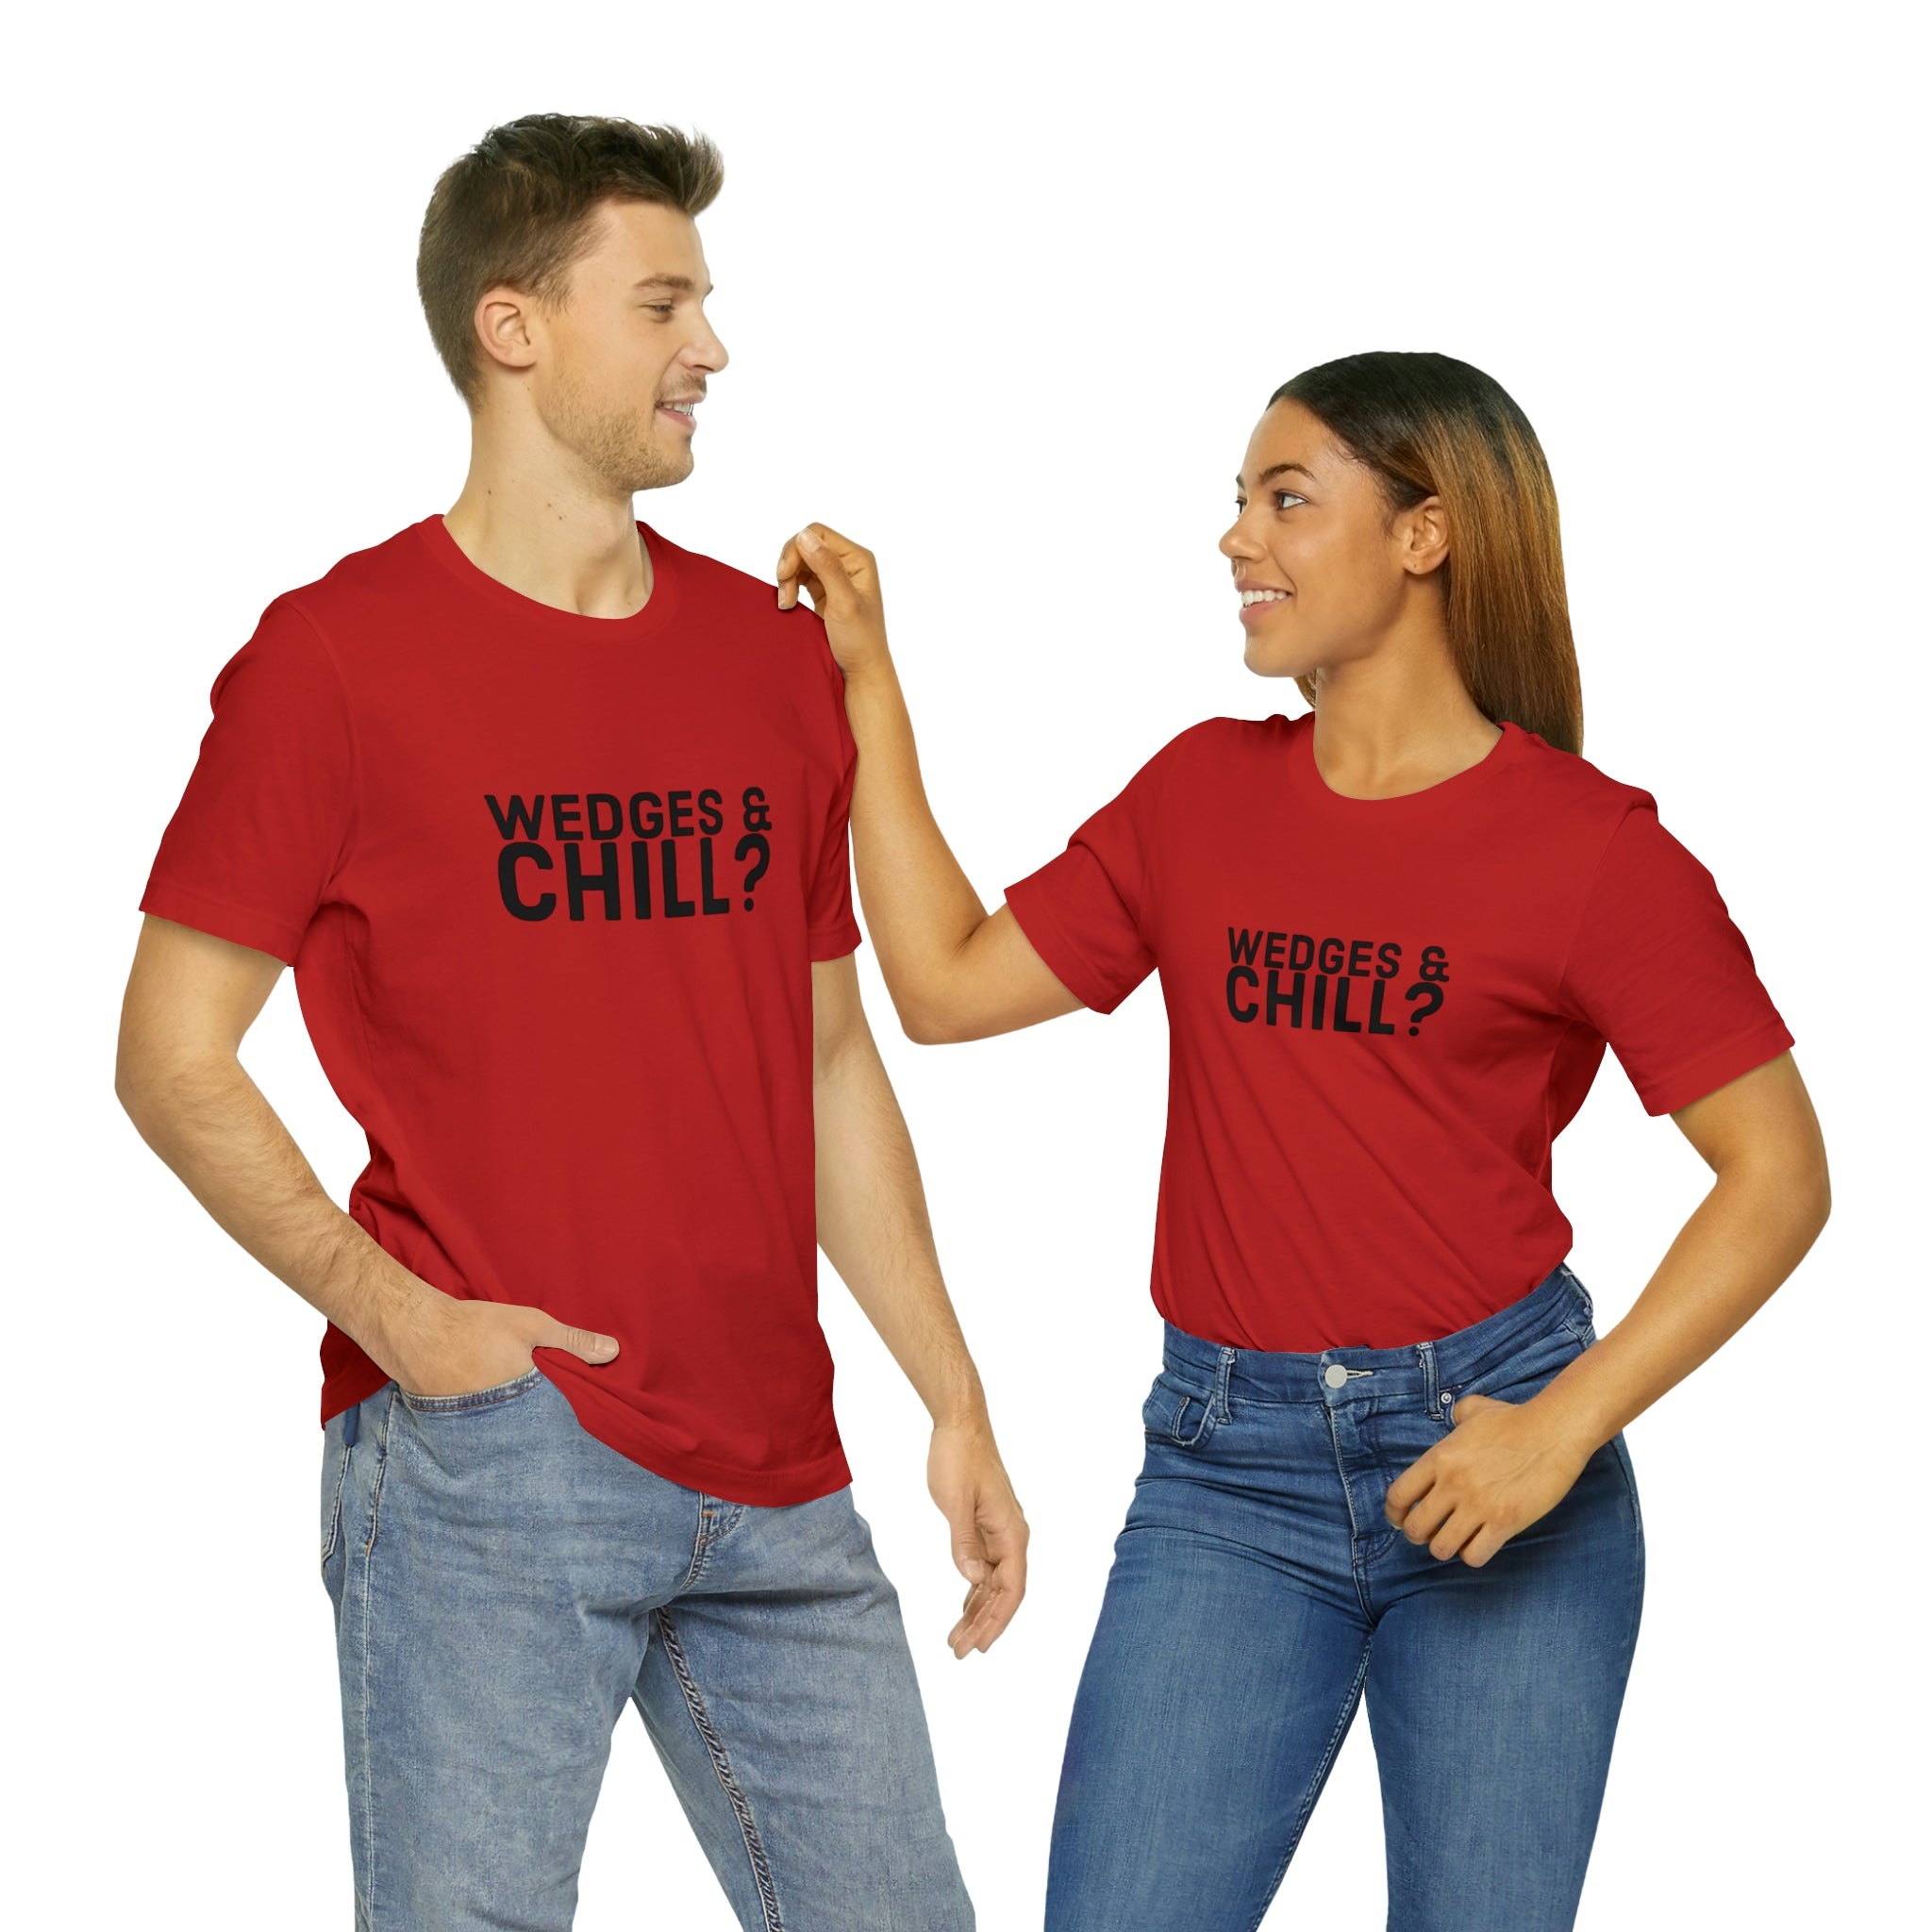 WEDGES & CHILL? Tee 